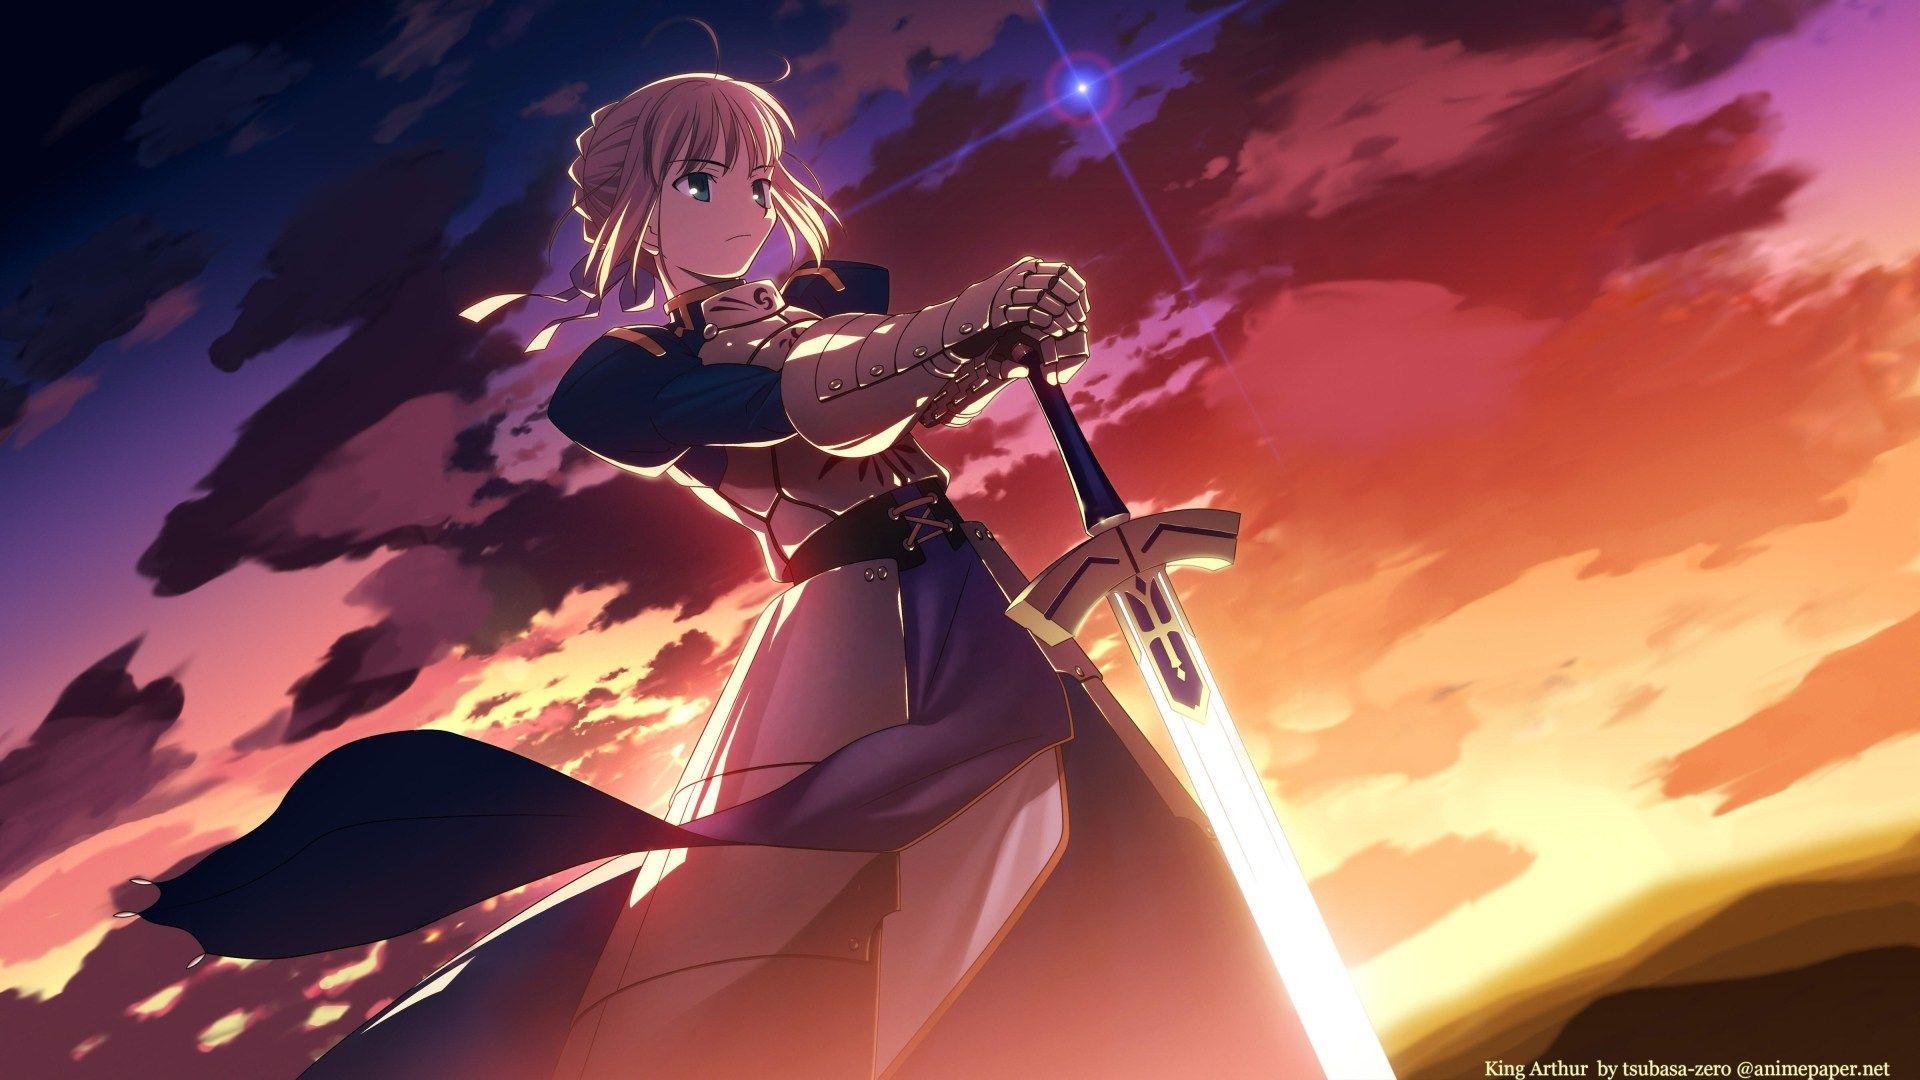 Fate Zero Saber Wallpapers Top Free Fate Zero Saber Backgrounds Wallpaperaccess